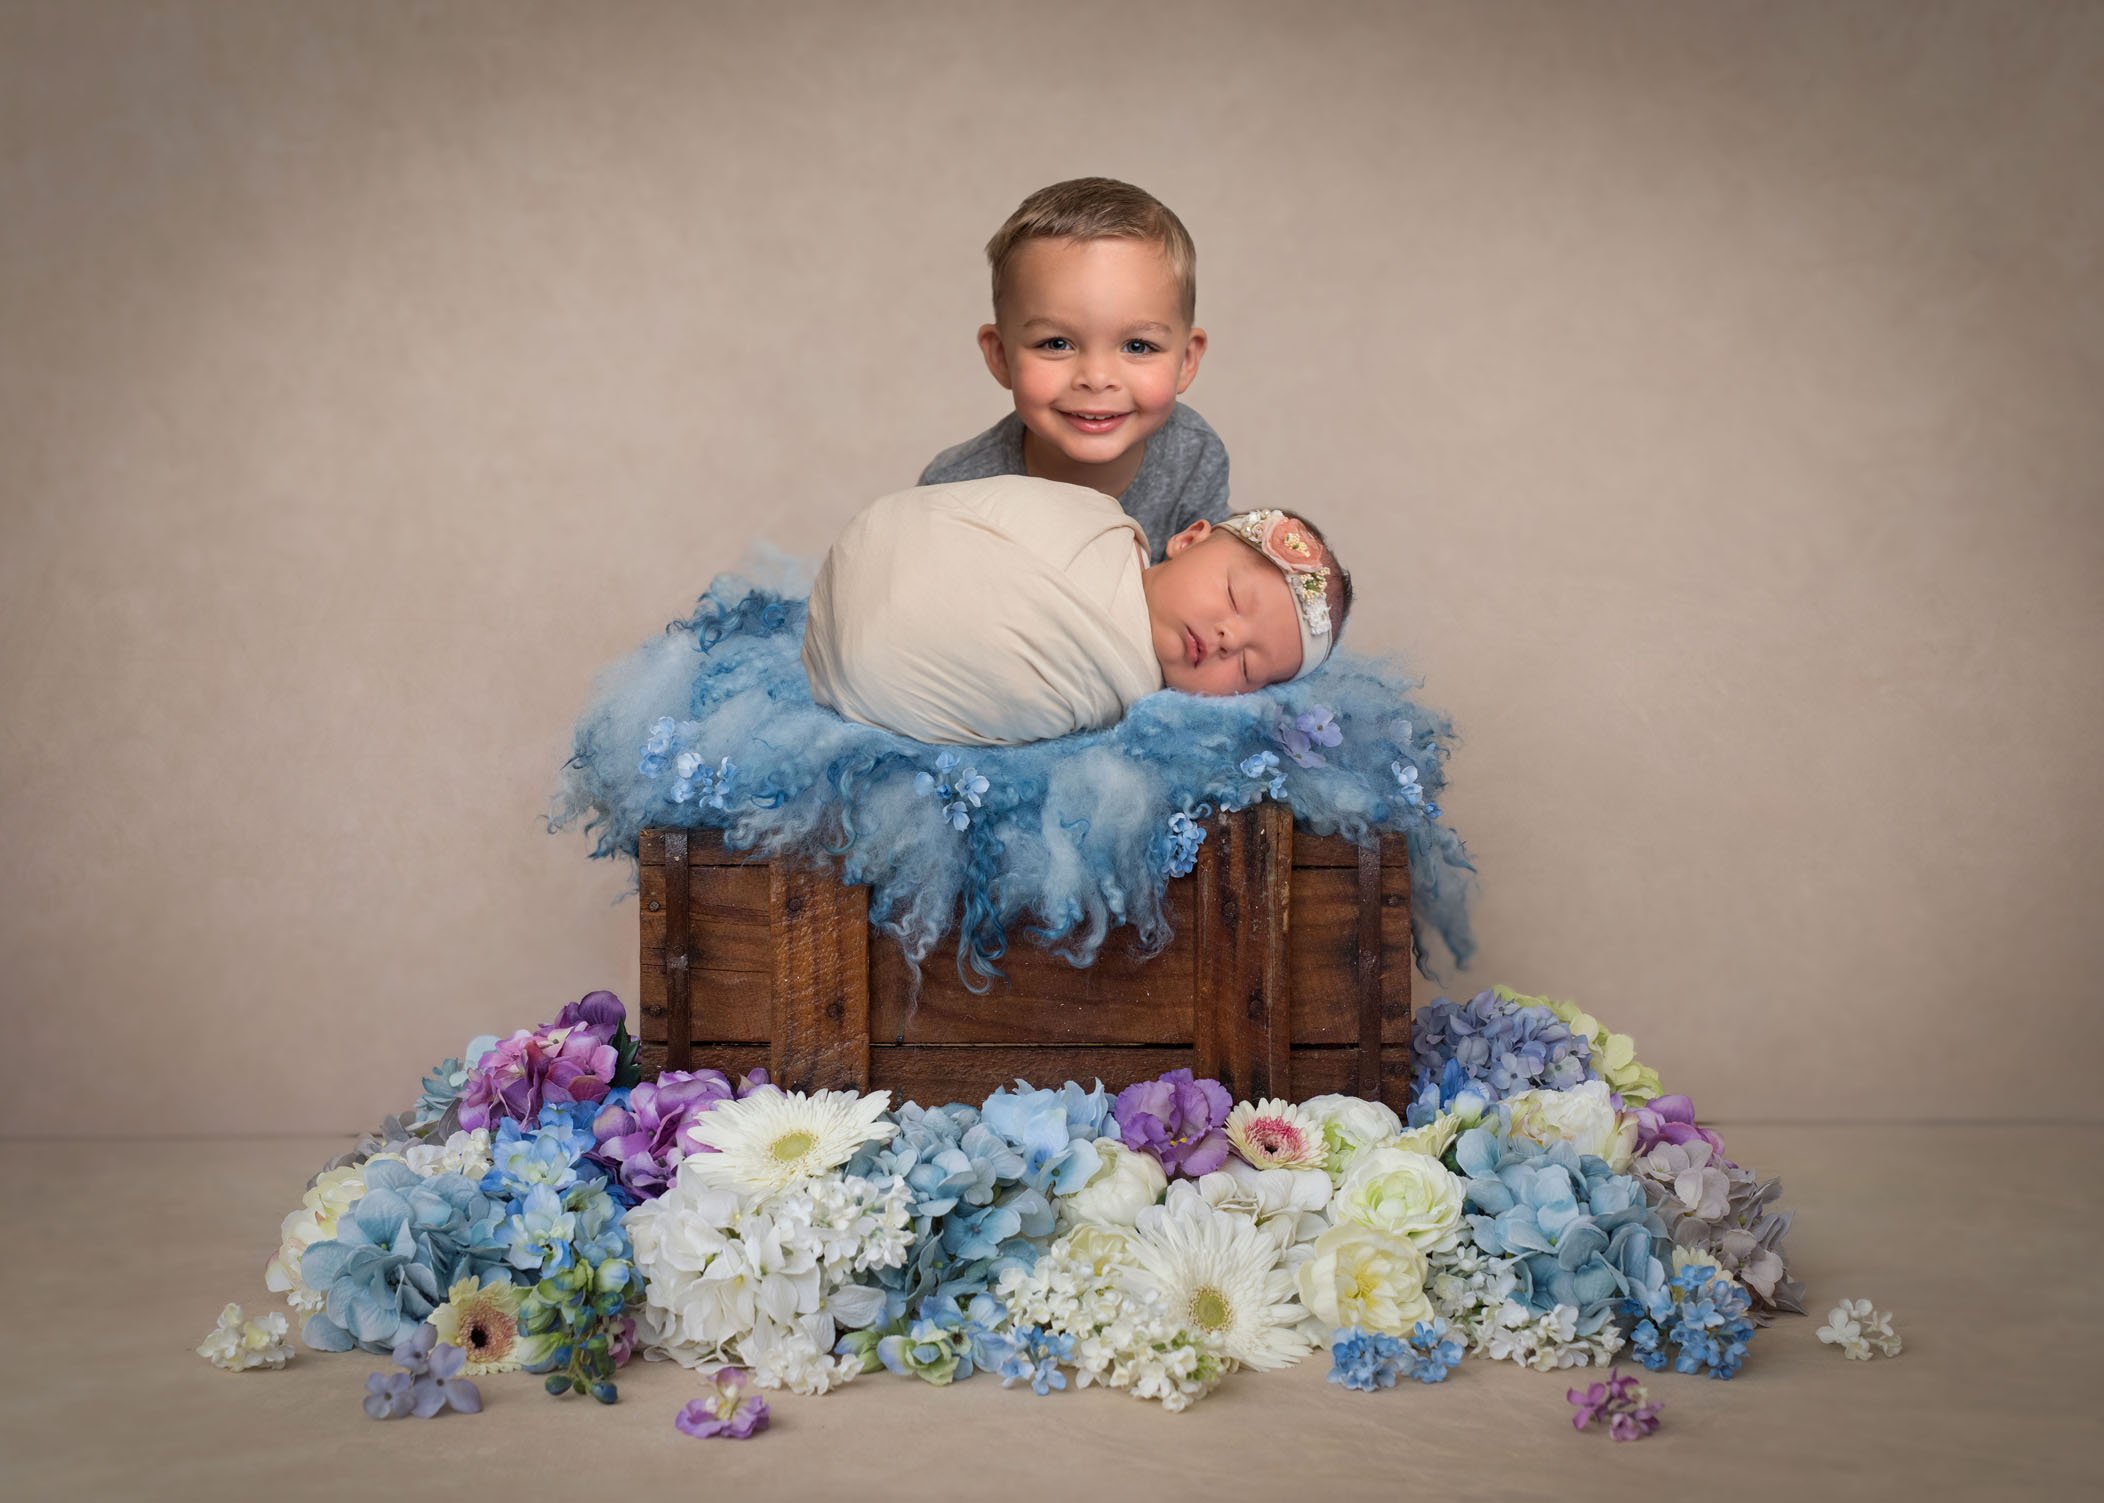 2 year old big brother proudly posing with newborn sister on a crate with flowers